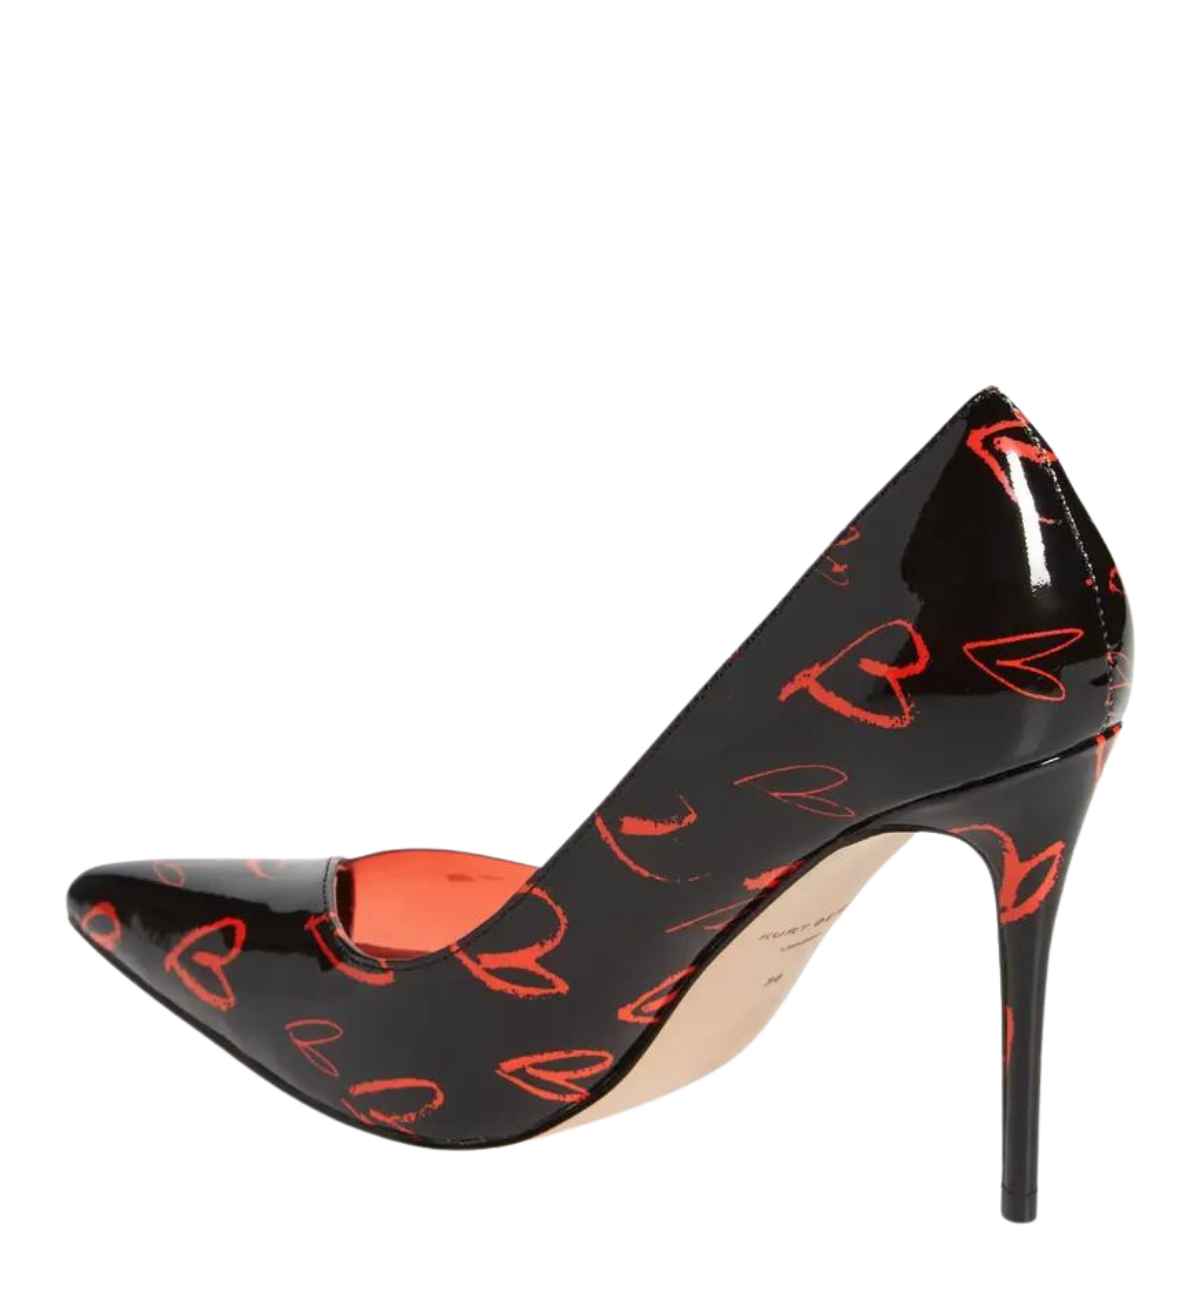 Black pointed toe heart heel with red heart pattern all over on white background.